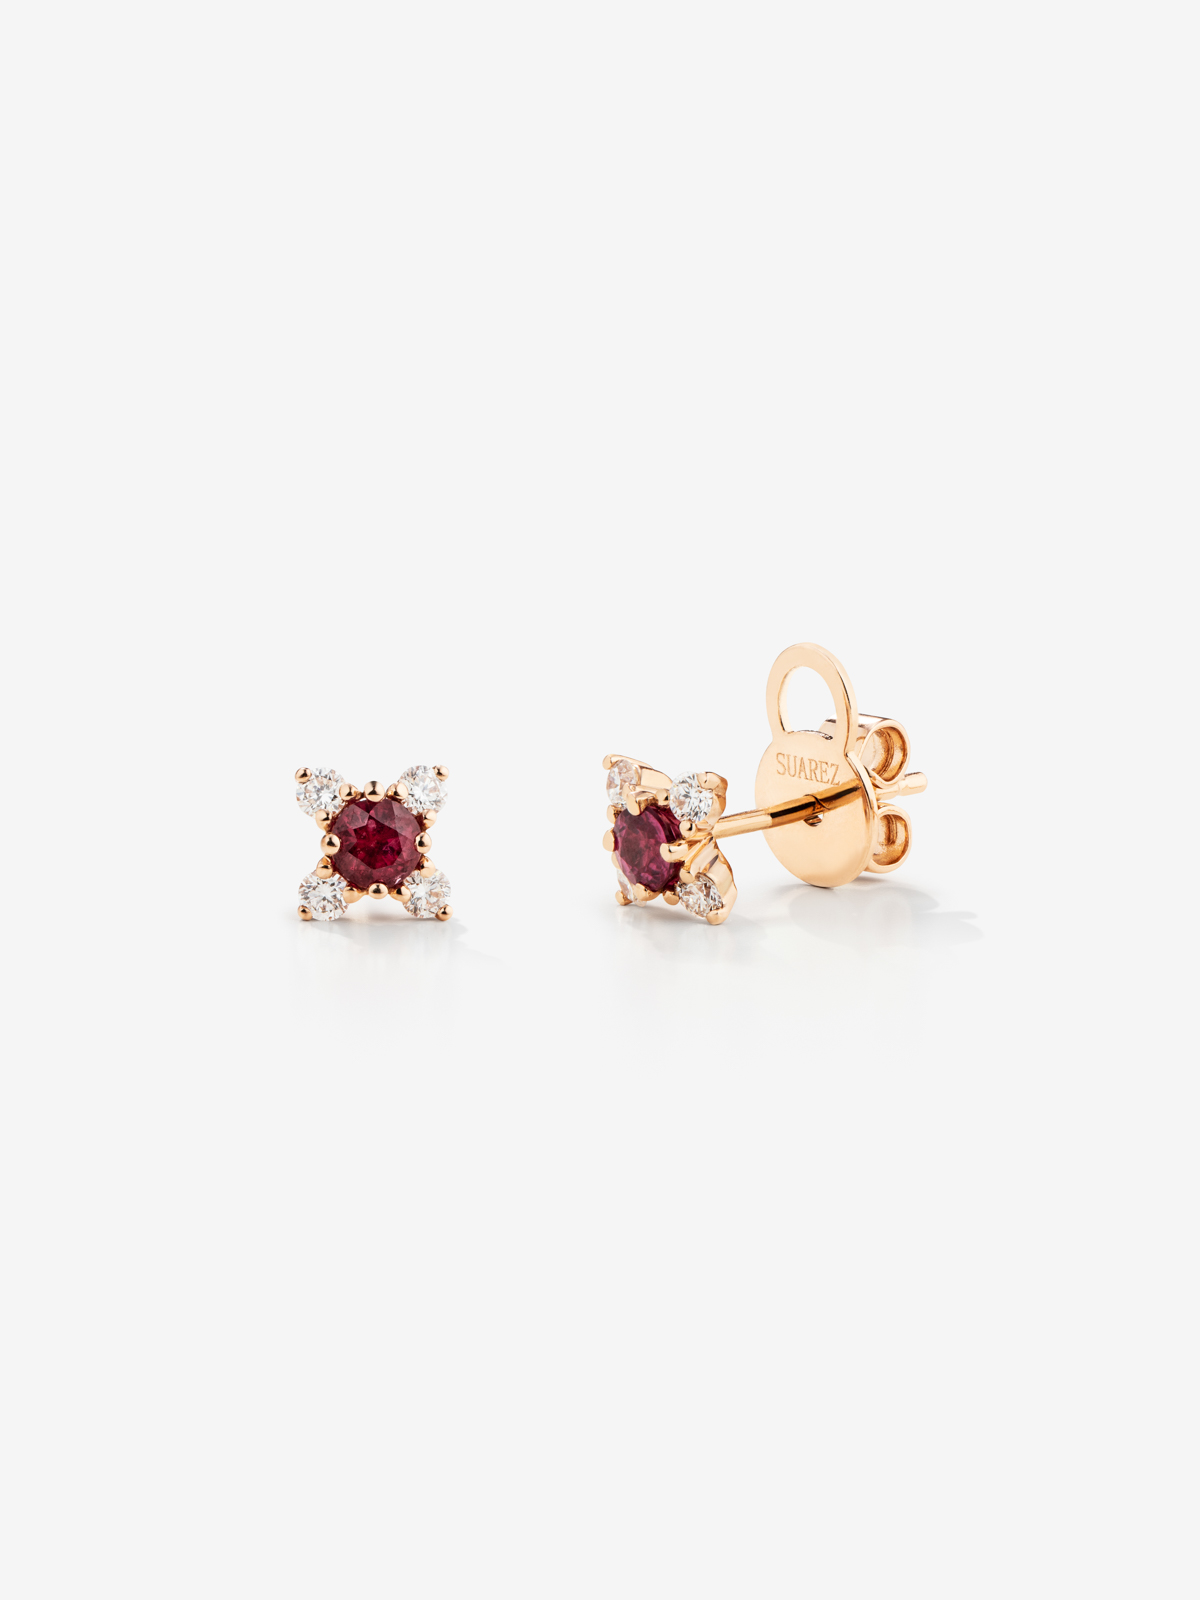 18K rose gold flower earrings with ruby and diamonds.